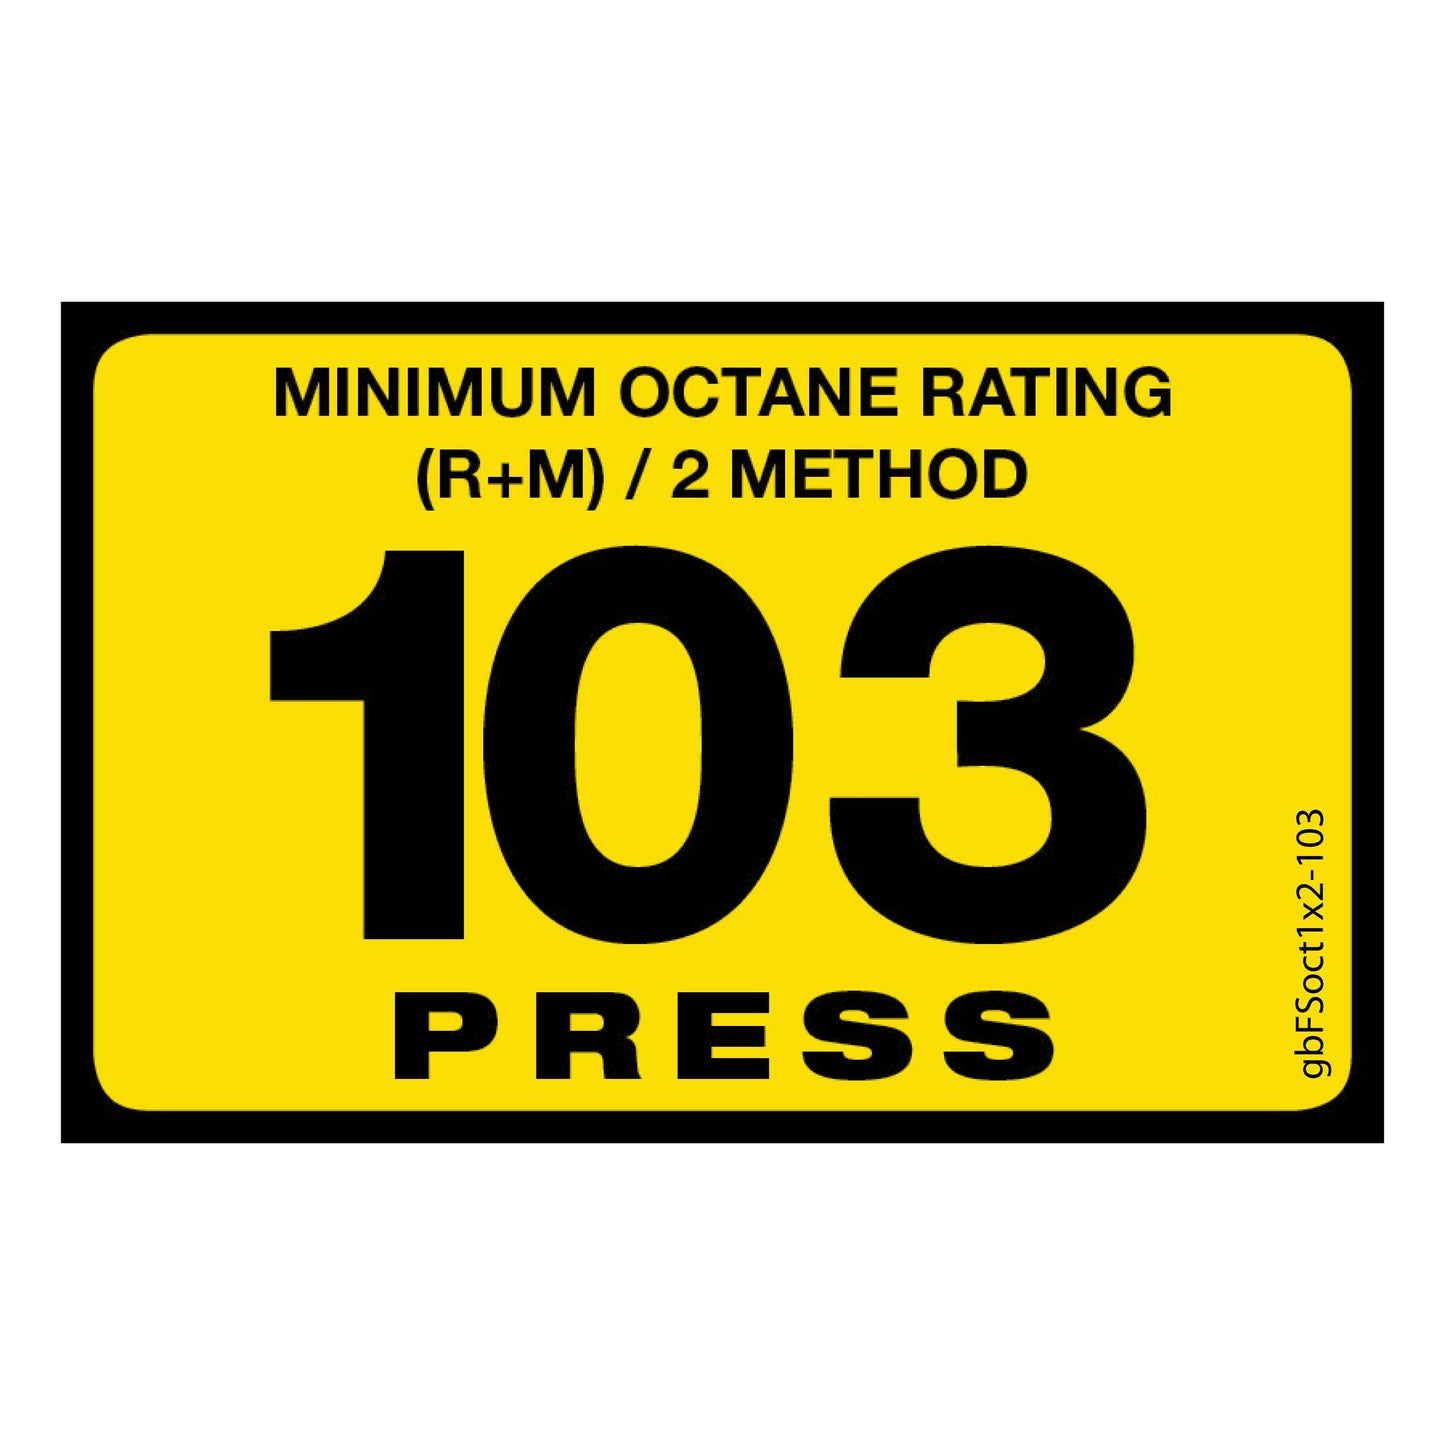 102 Press Octane Rating Decal. 1 inch by 2 inches in size. 